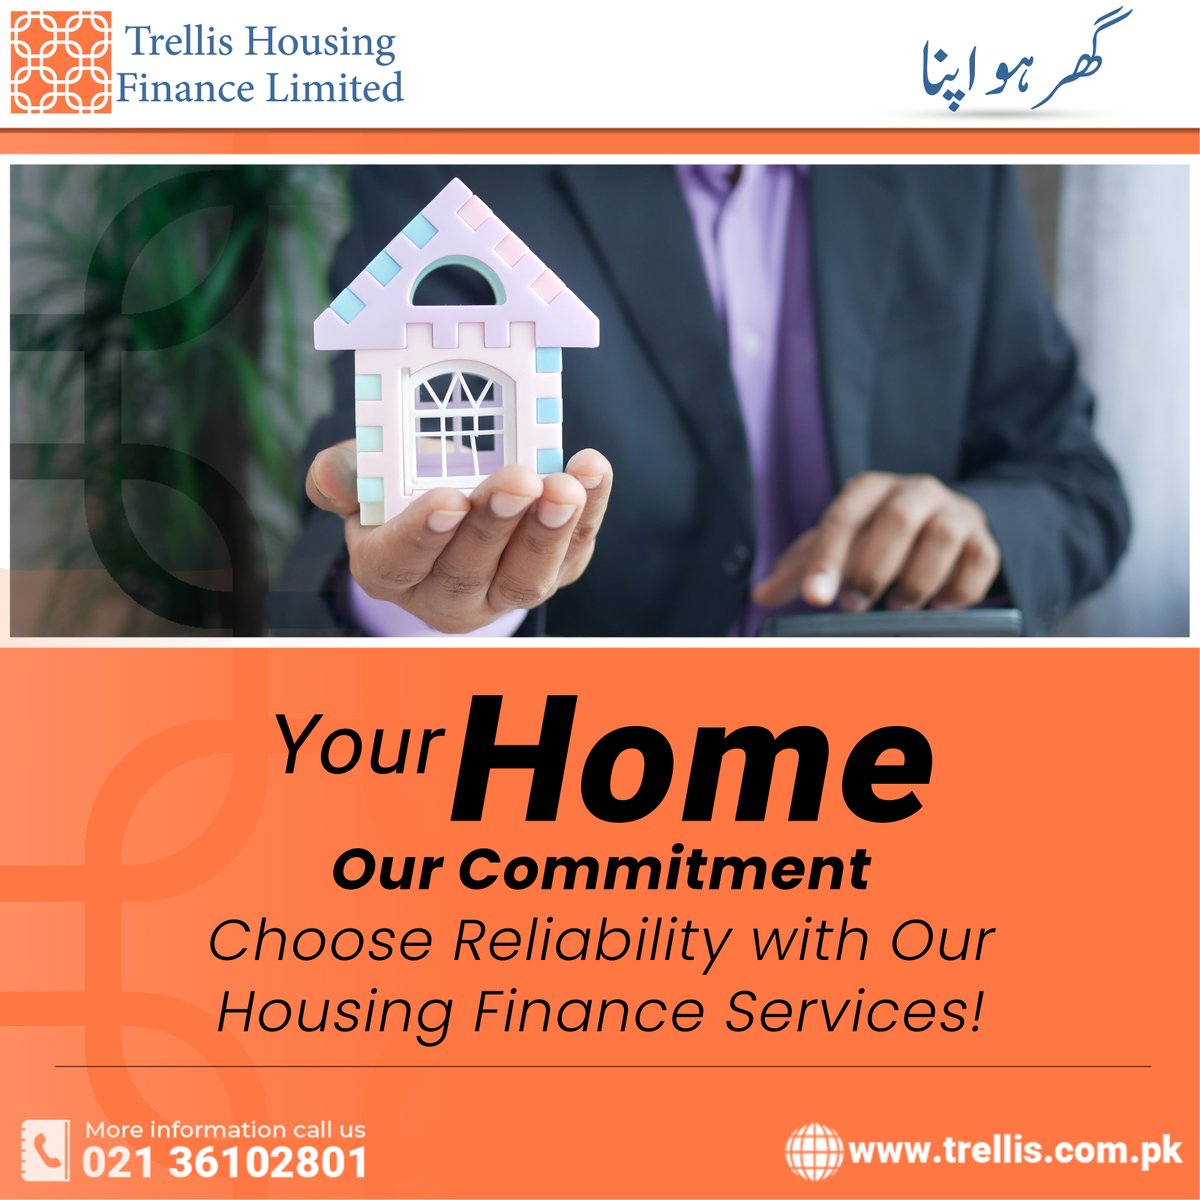 Looking for a reliable partner in your home-buying journey? Look no further! Introducing our premier Housing Finance Services, designed to provide you with unparalleled reliability and support.

#Trellis #THFL #homebuying #homebuyers #homefinance #houseloans #homeloanfinance